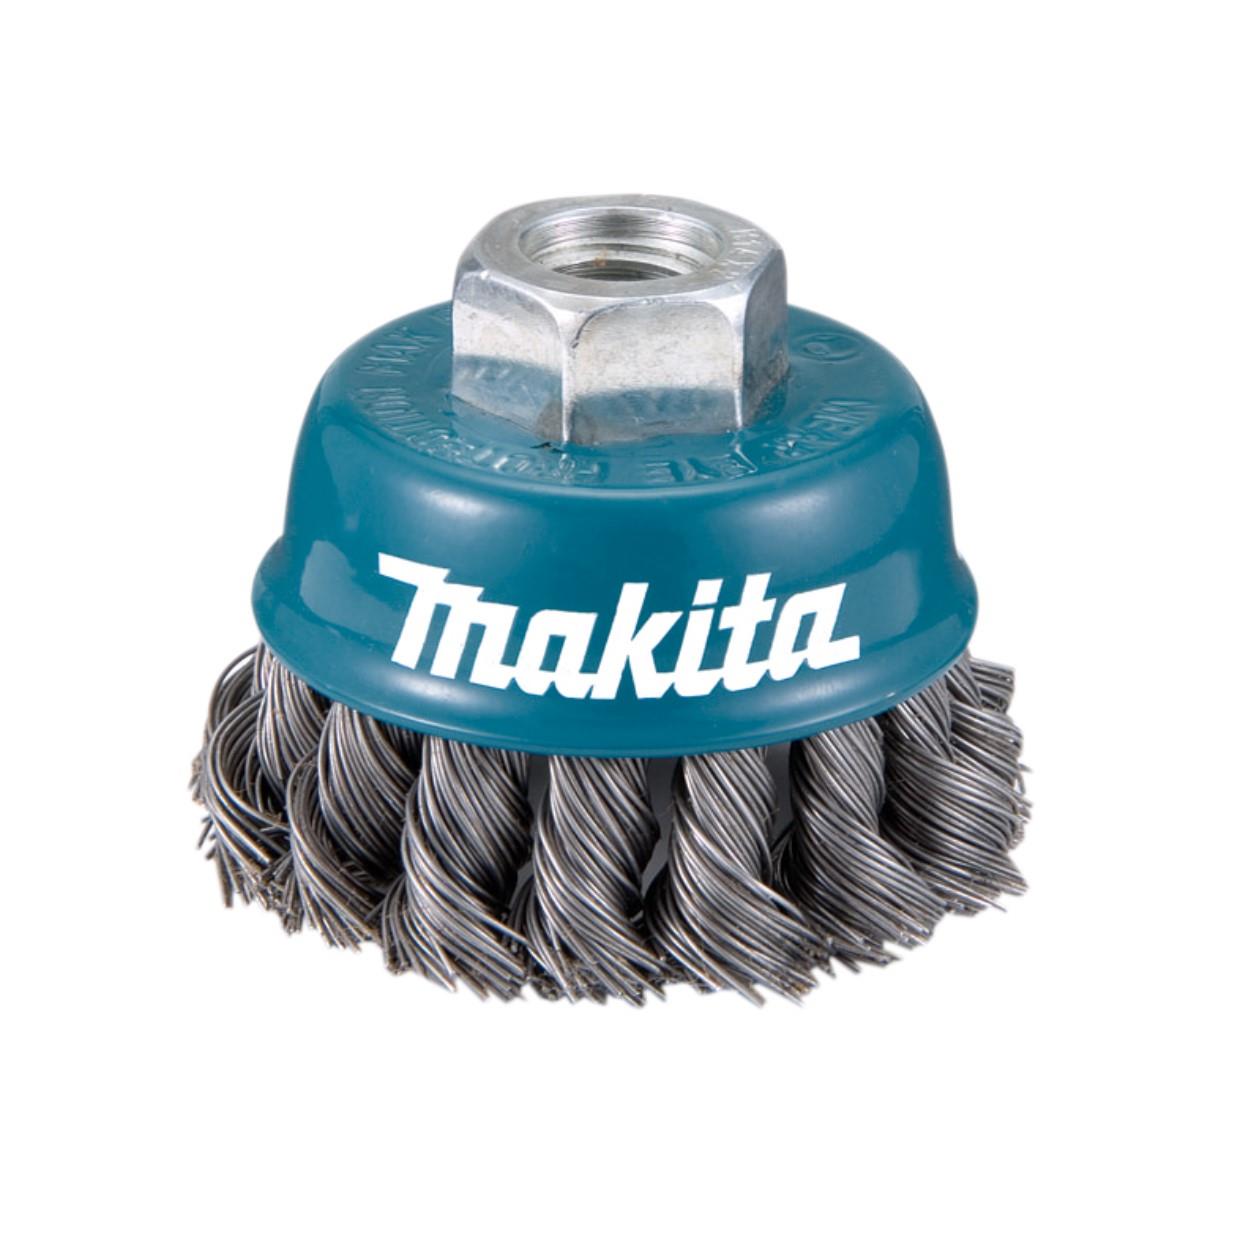 Makita D-24131 Knotted Wire Cup Brush; For Angle Grinder; 75mm Diameter; M14 x 2 Spindle Thread